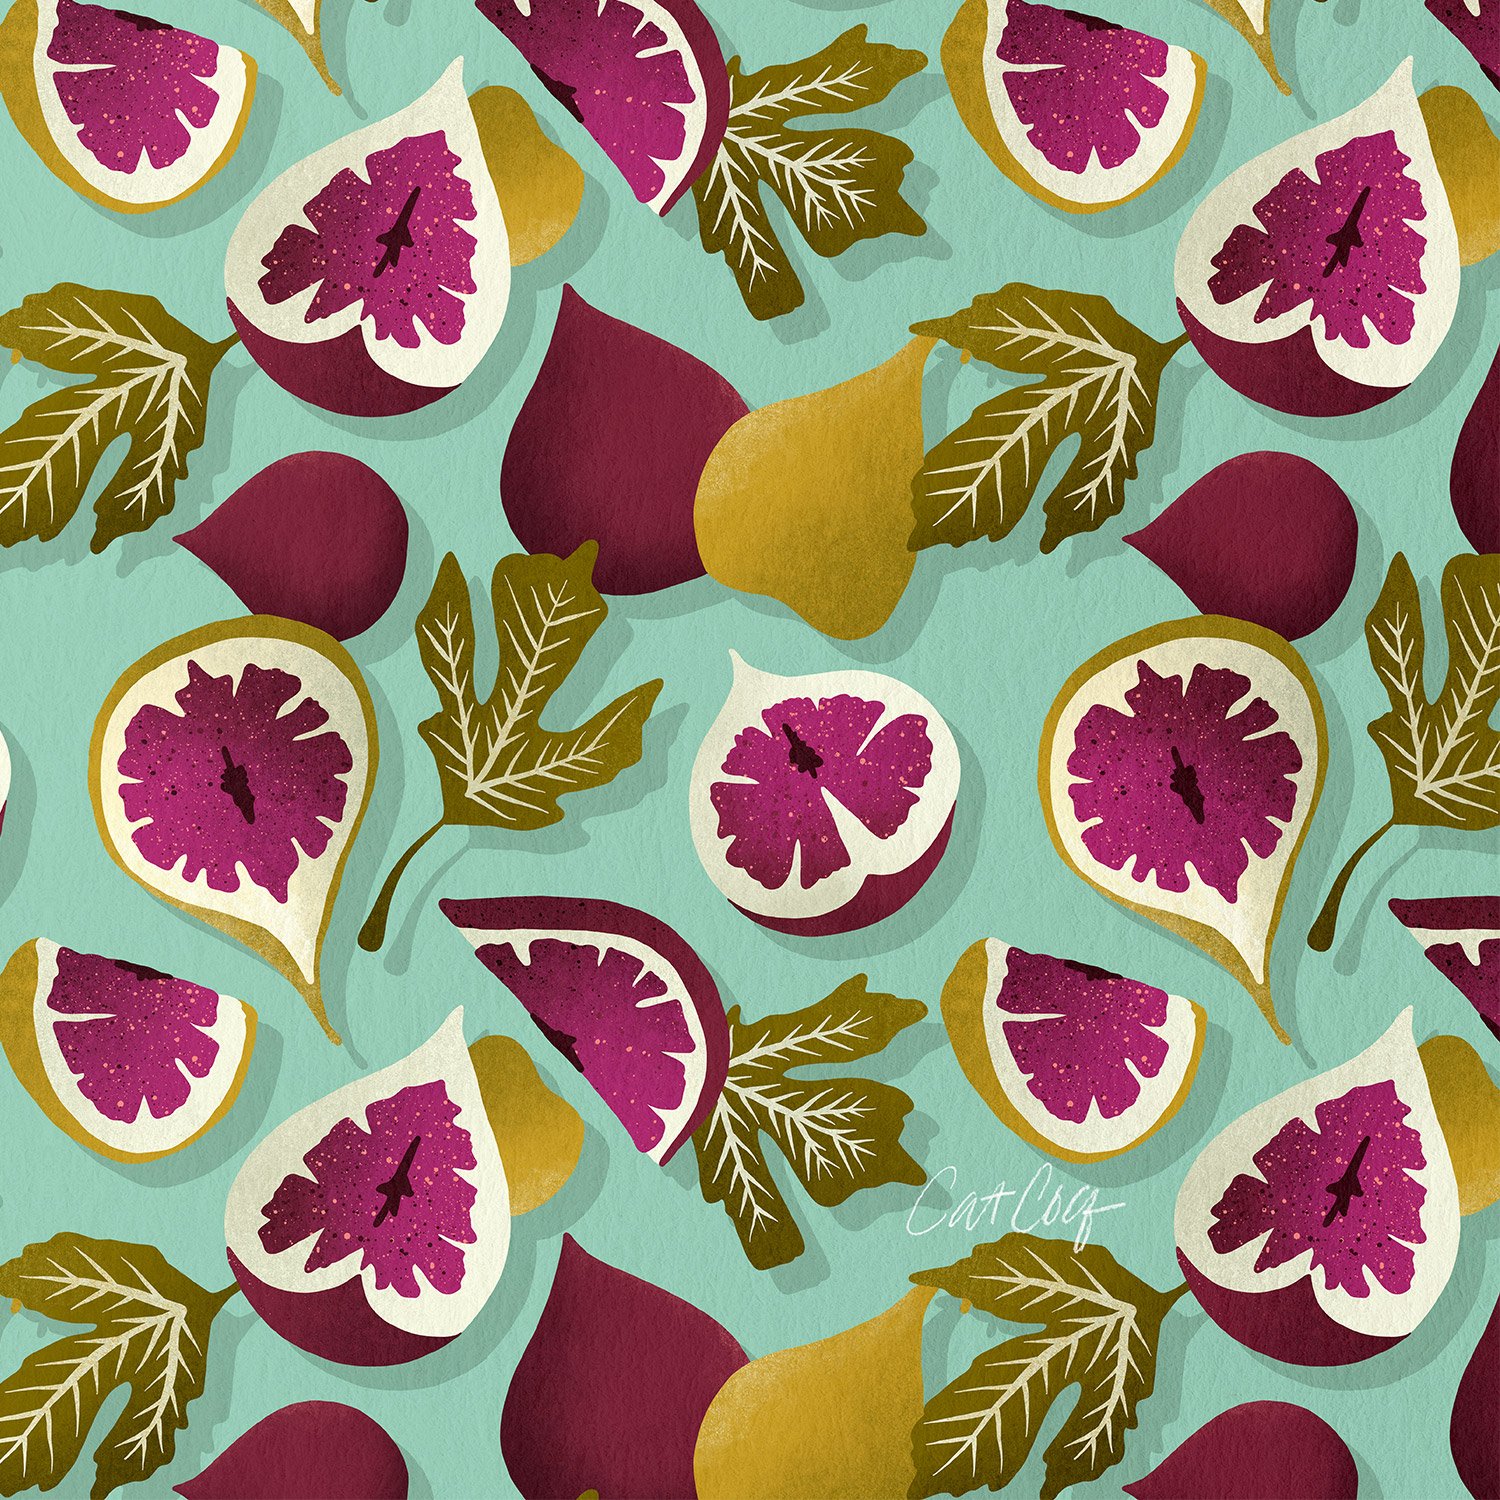 Mint-FigCollection-pattern.jpg